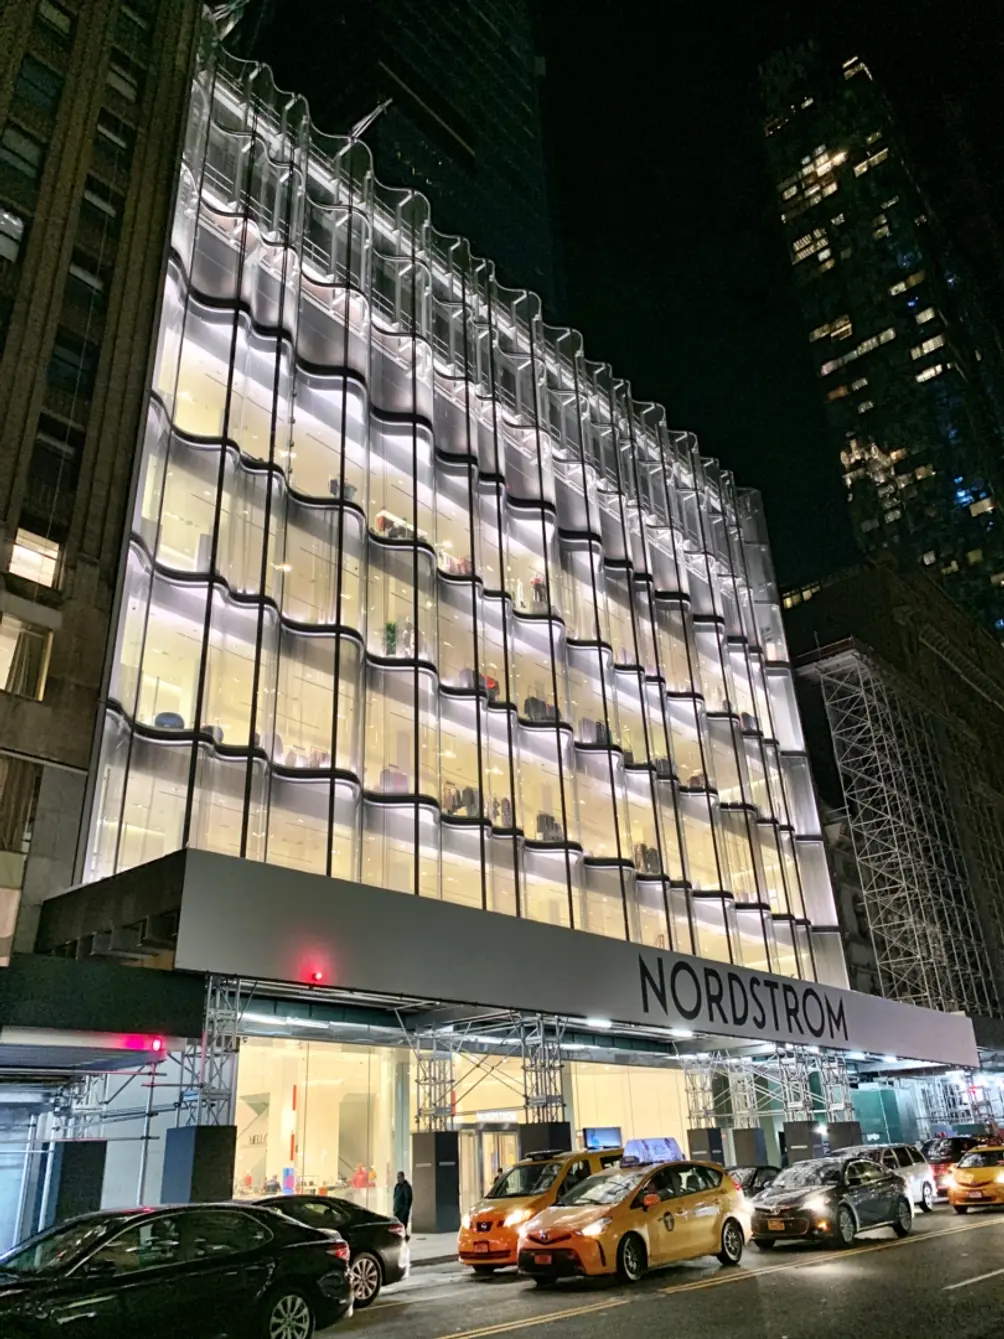 Nordstrom's NYC men's store will debut in 2018, ahead of Central Park  Tower's opening - Curbed NY